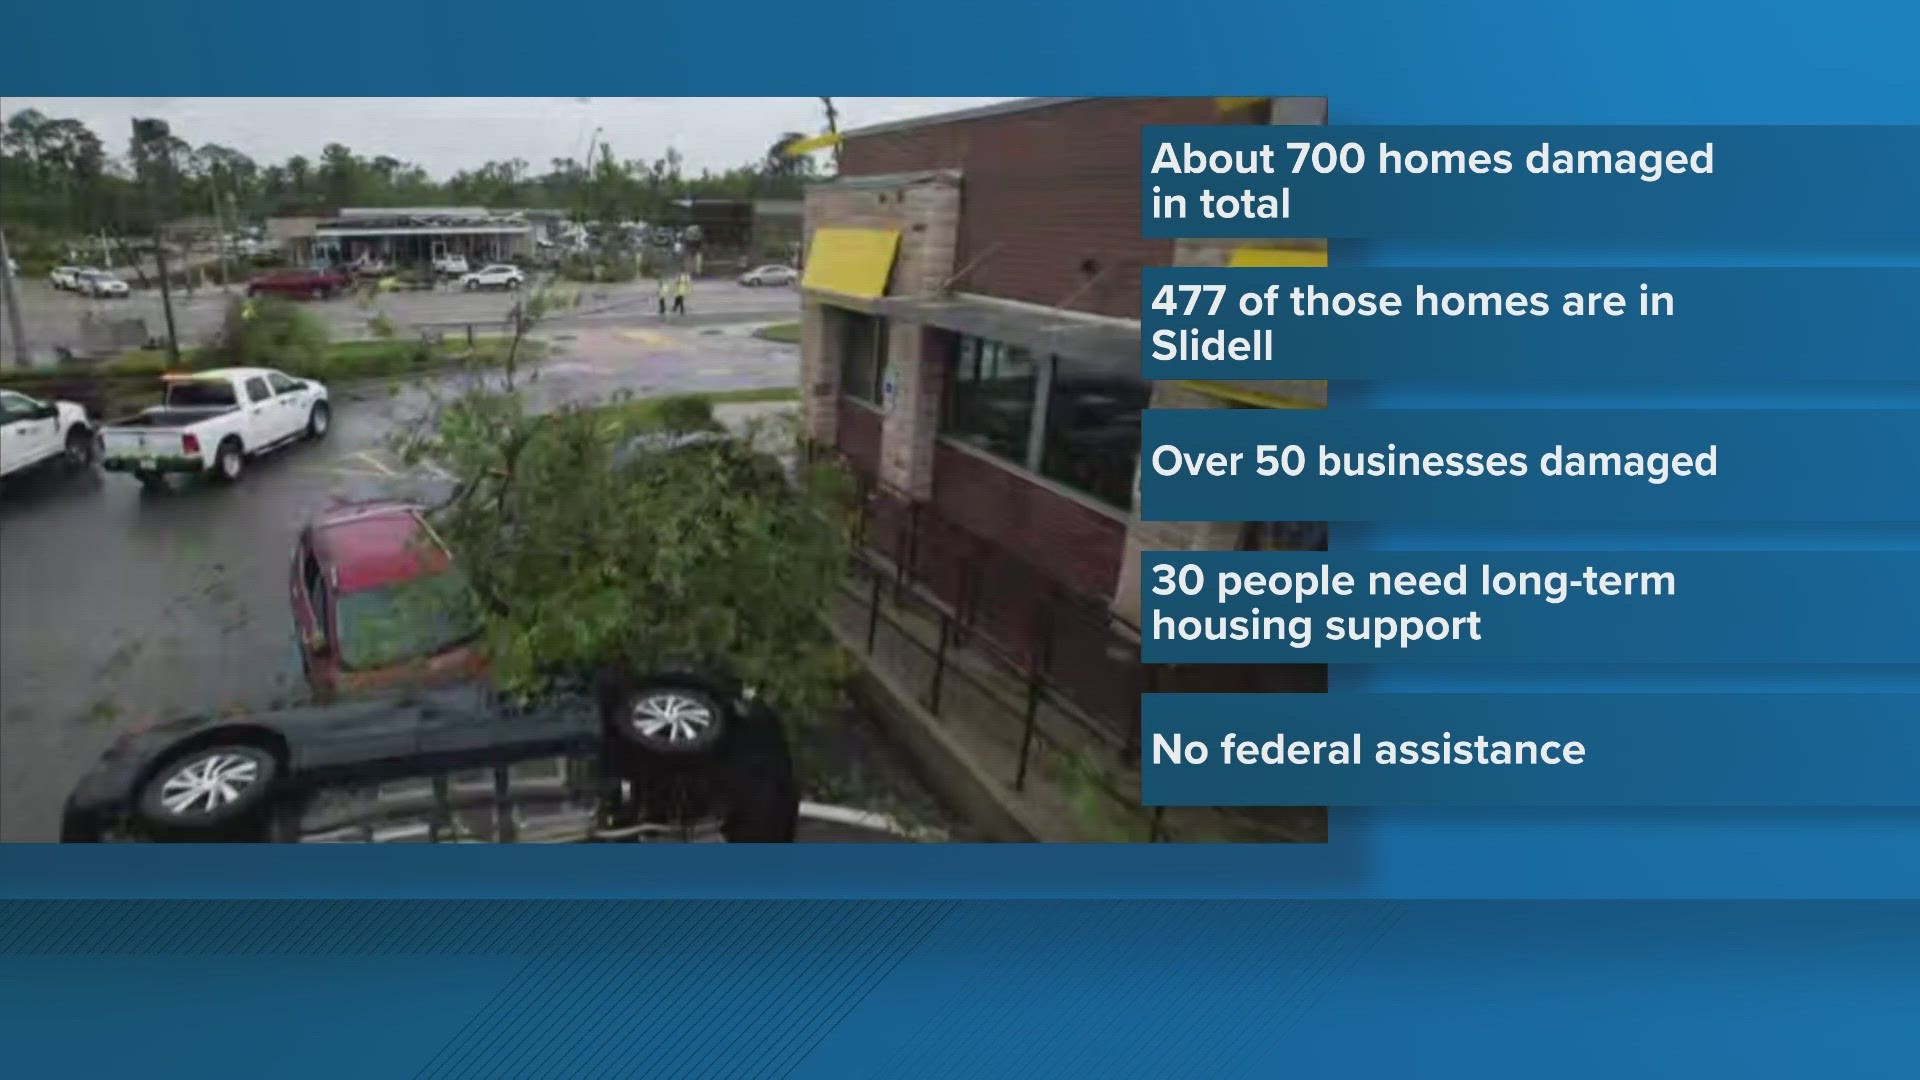 Details now released on the extent of the damage from a tornado that swept through Slidell on April 10.